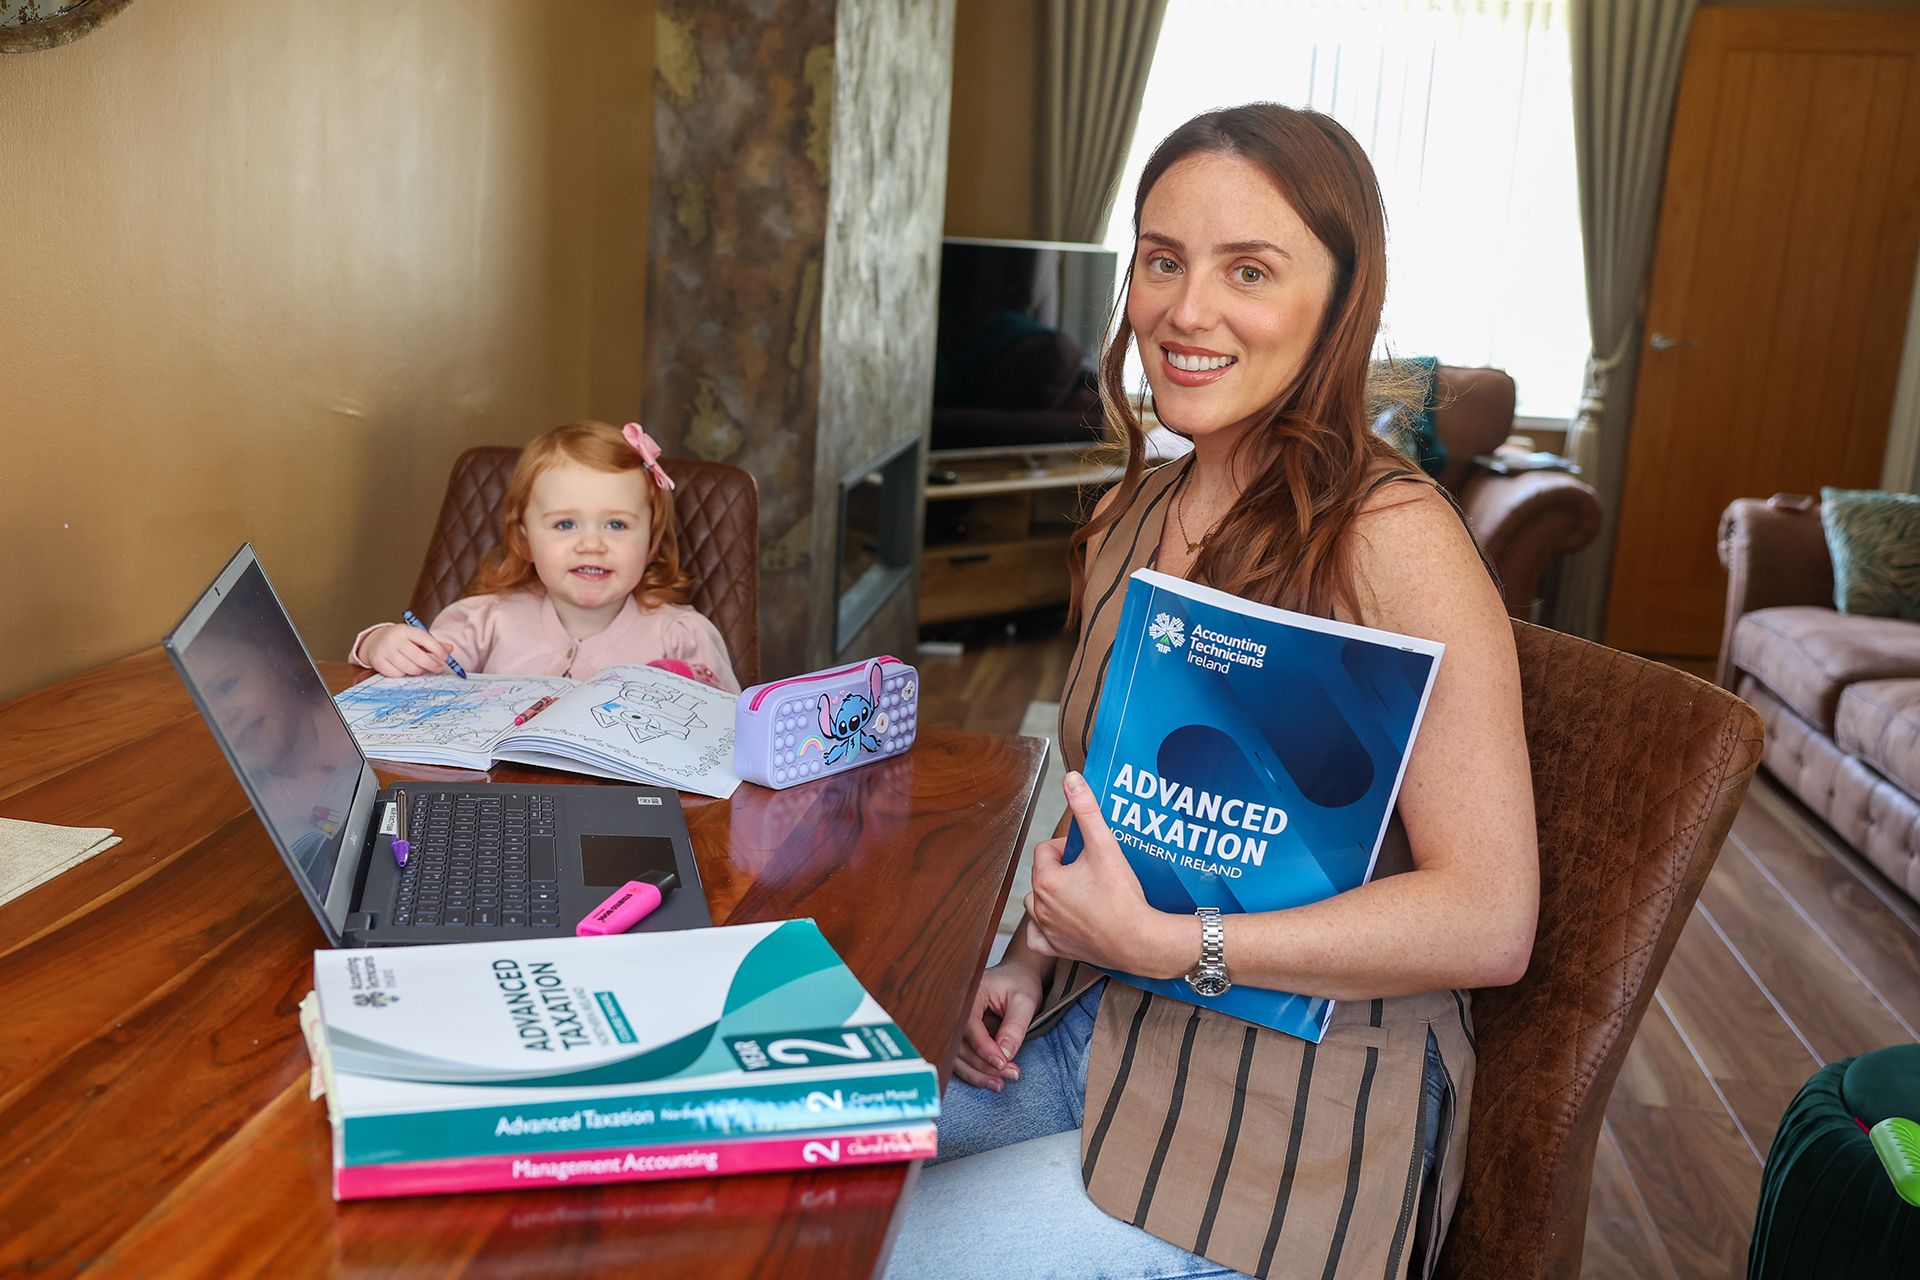 TEAMWORK: Catriona McGrattan and her daughter Harper. Catriona studied for and sat exams for her diploma whilst pregnant